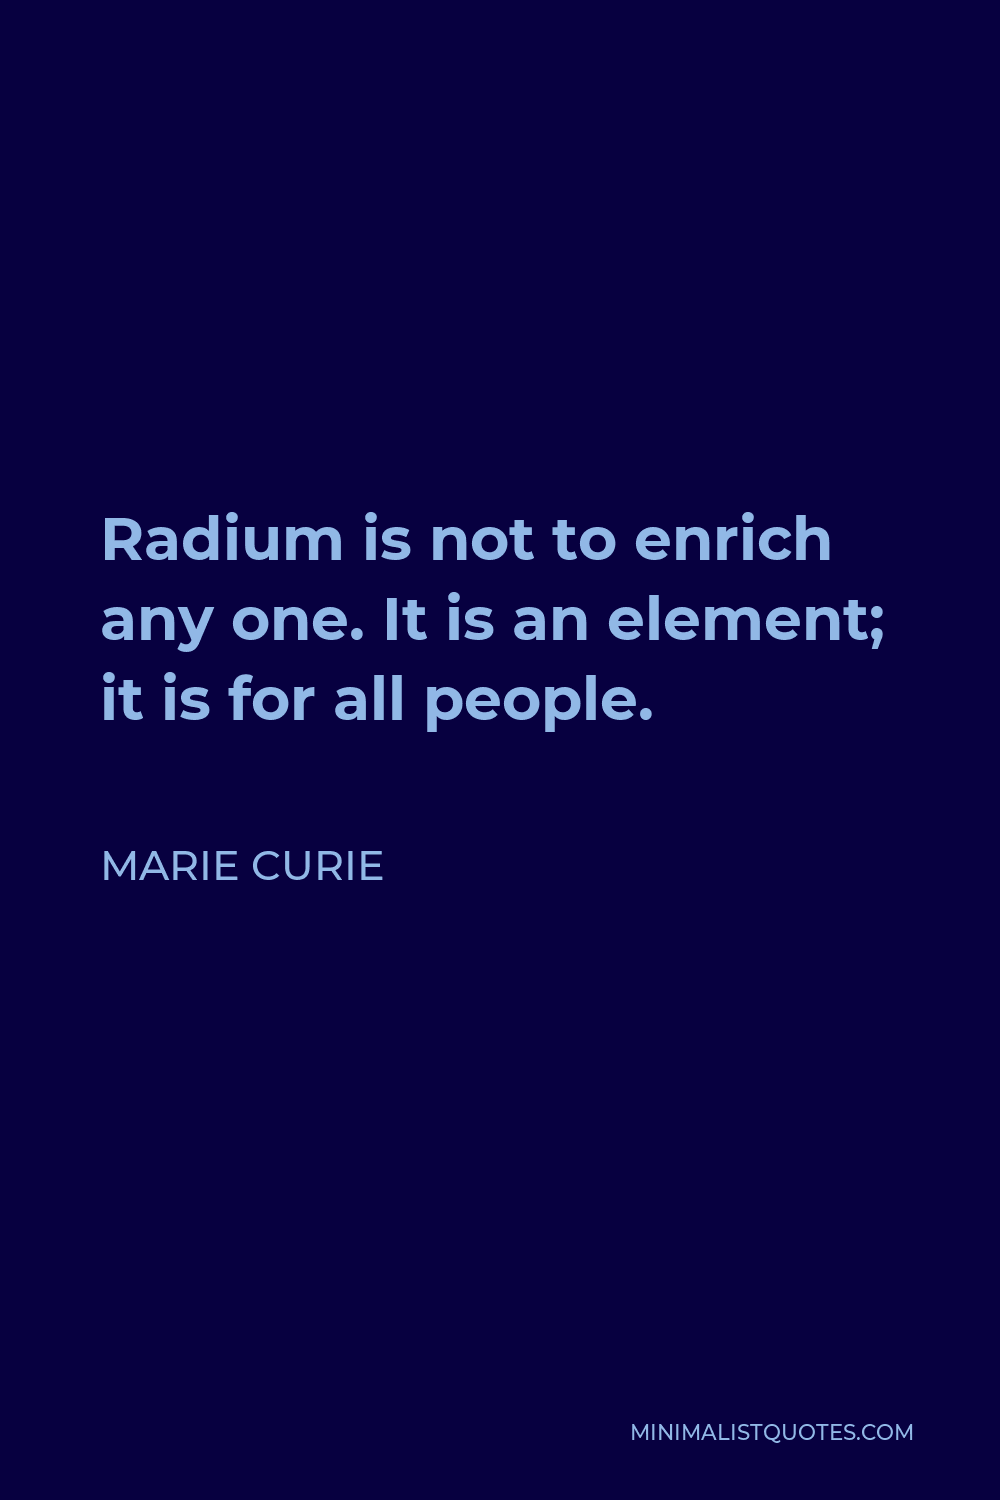 Marie Curie Quote - Radium is not to enrich any one. It is an element; it is for all people.